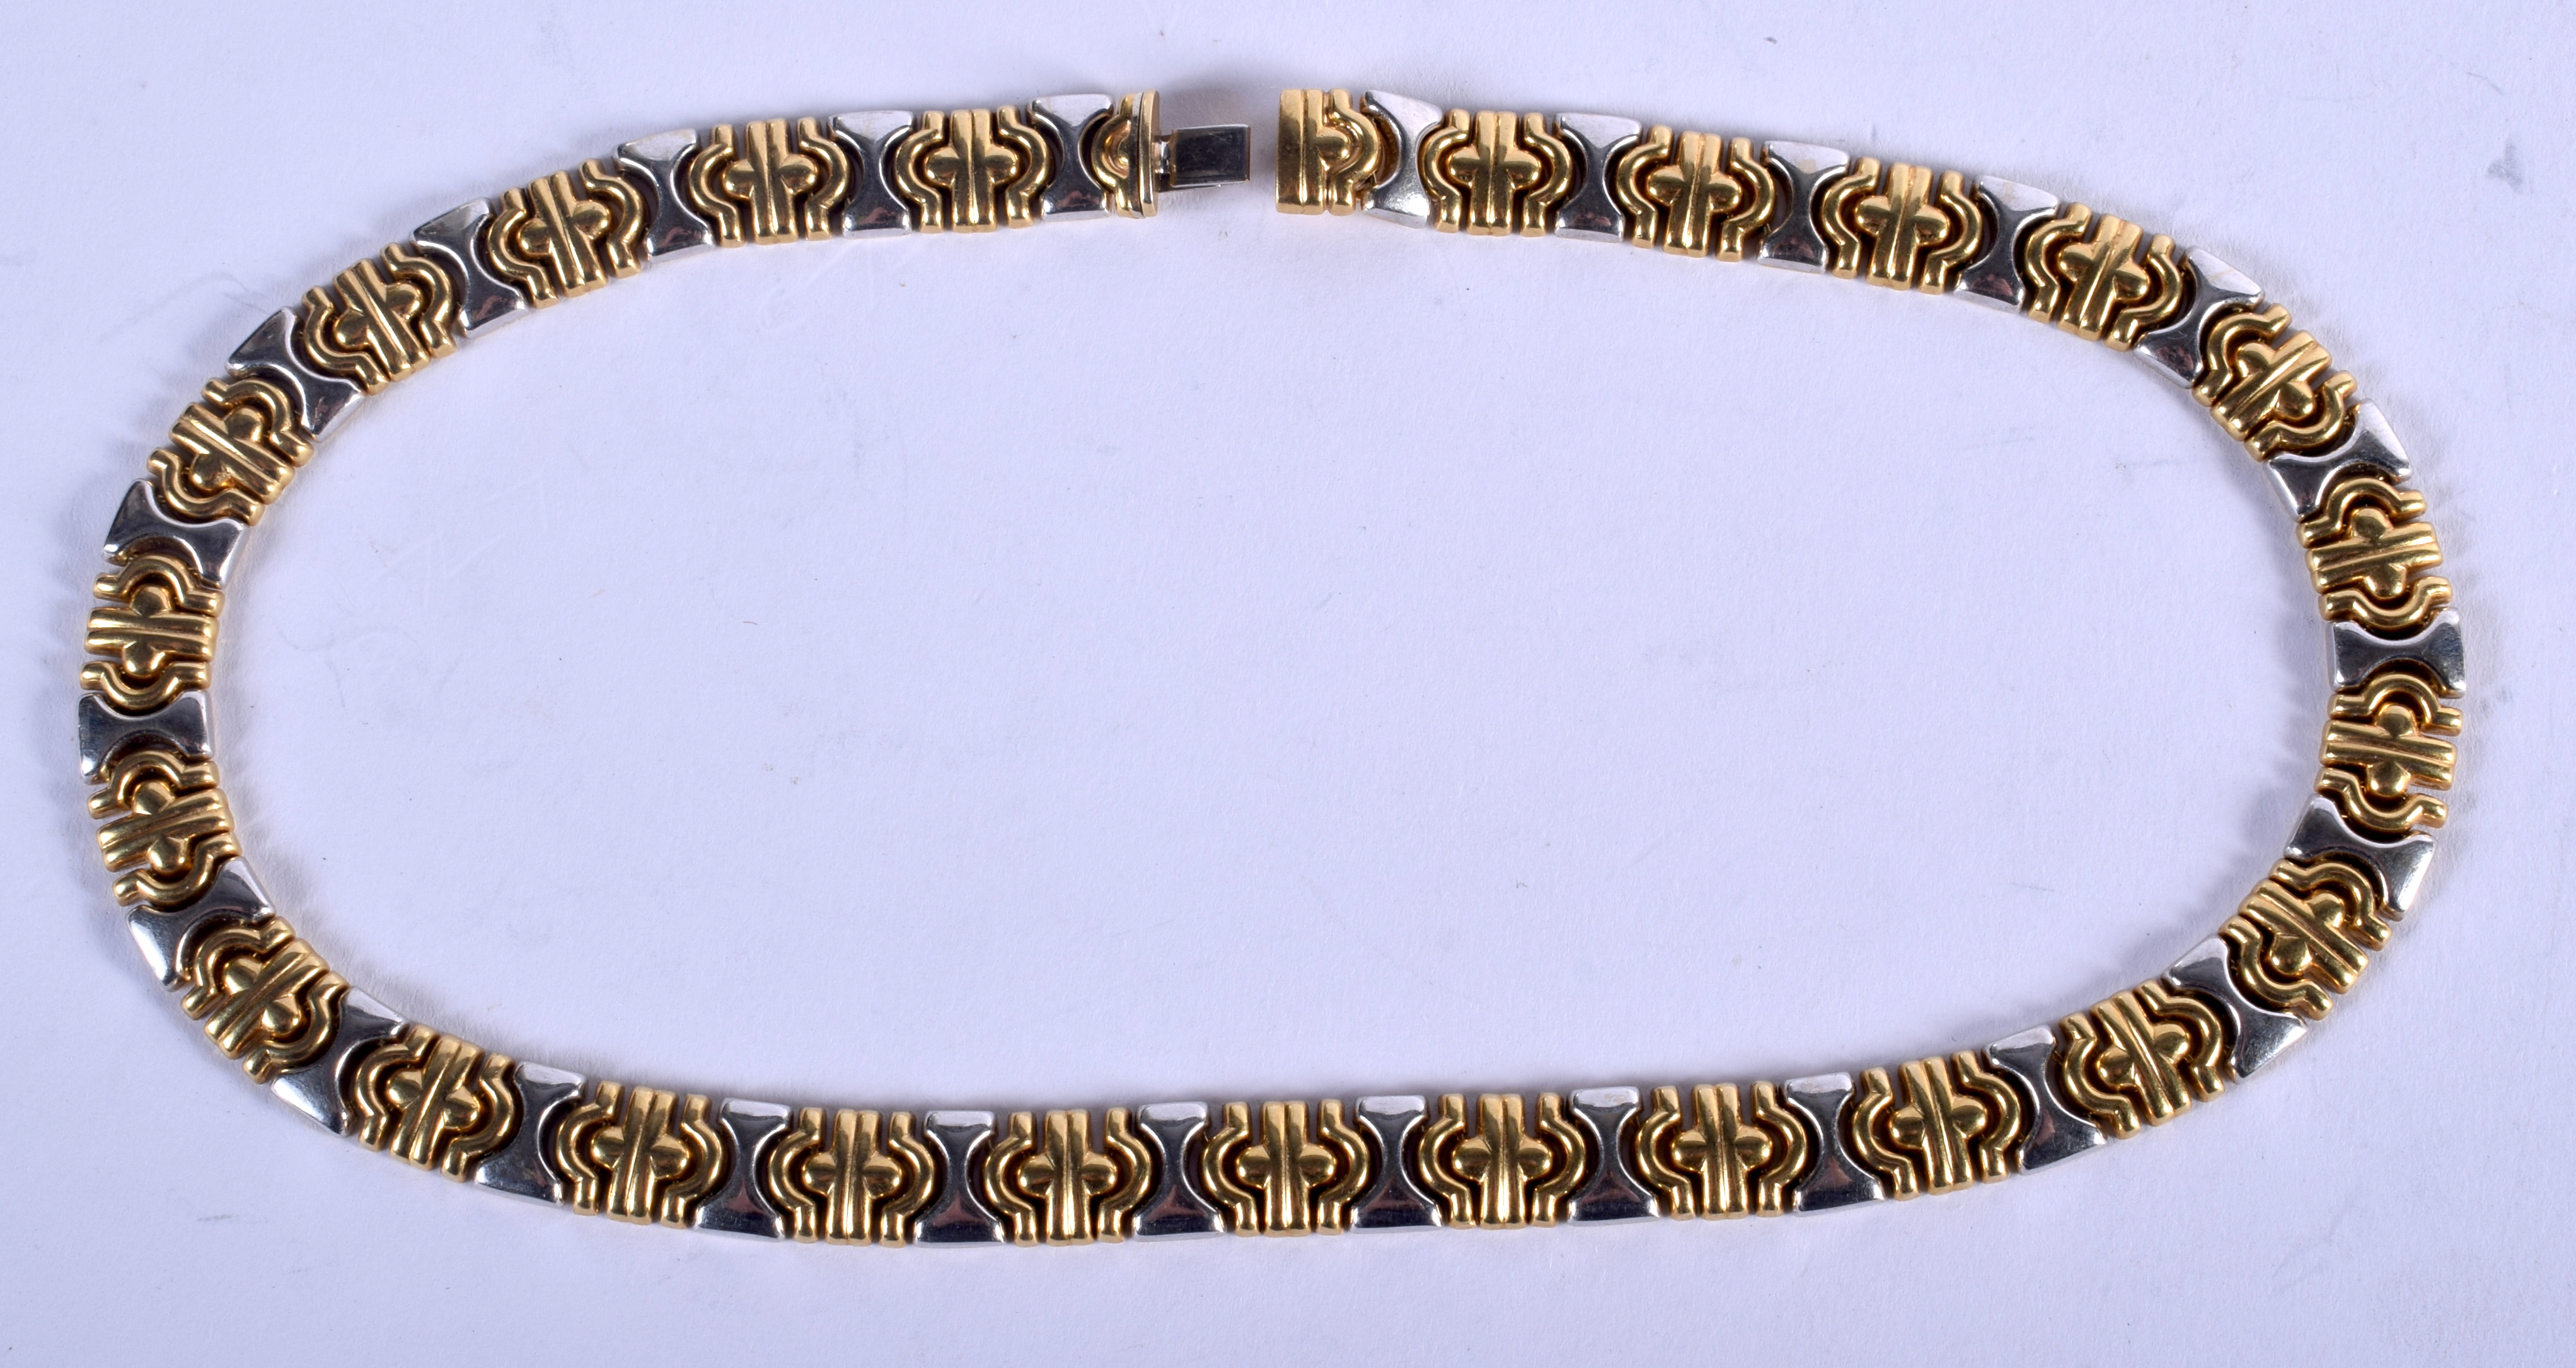 A LOVELY 18CT GOLD TWO TONE BVLGARI STYLE NECKLACE of stylish form. 57 grams. 41 cm long.